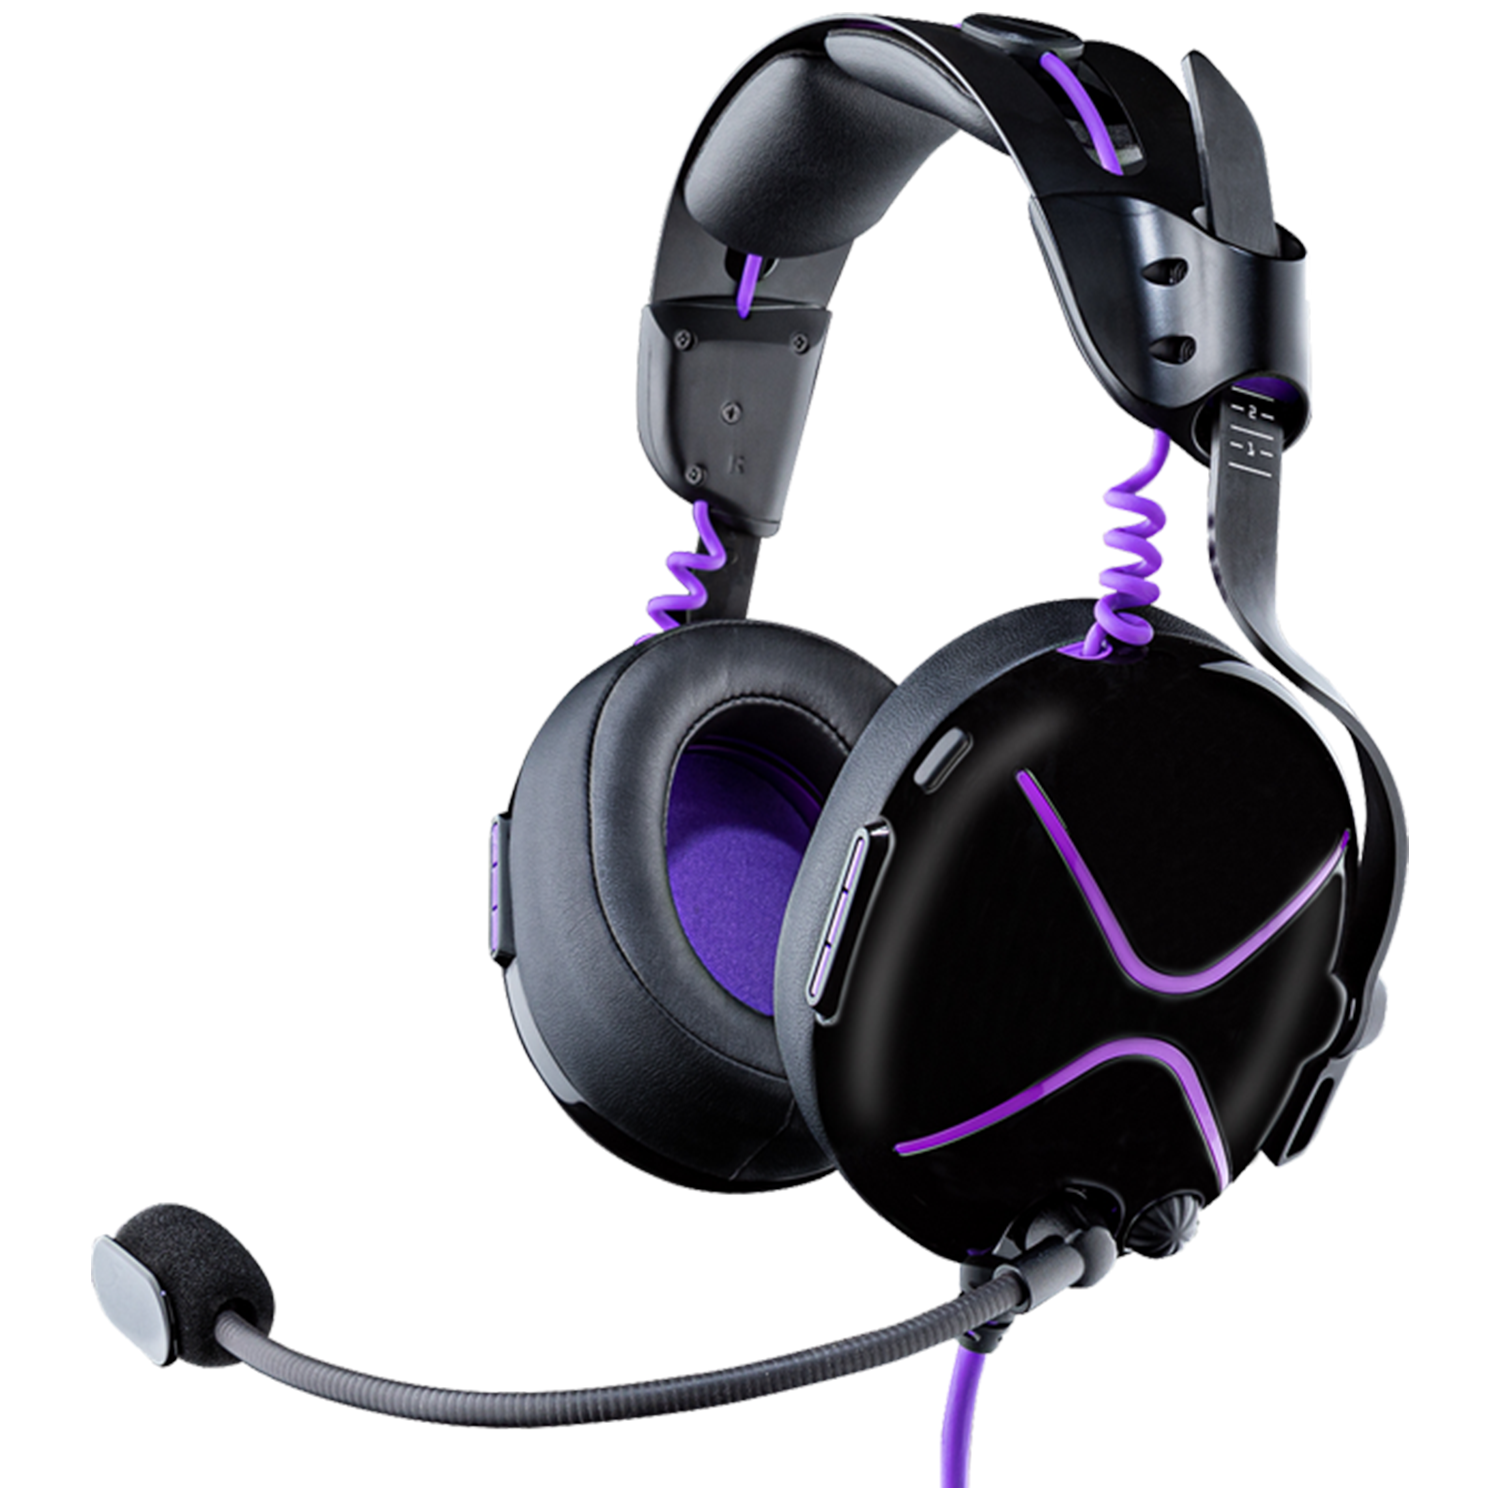 Series AF PC X|S Xbox Pro & Headset